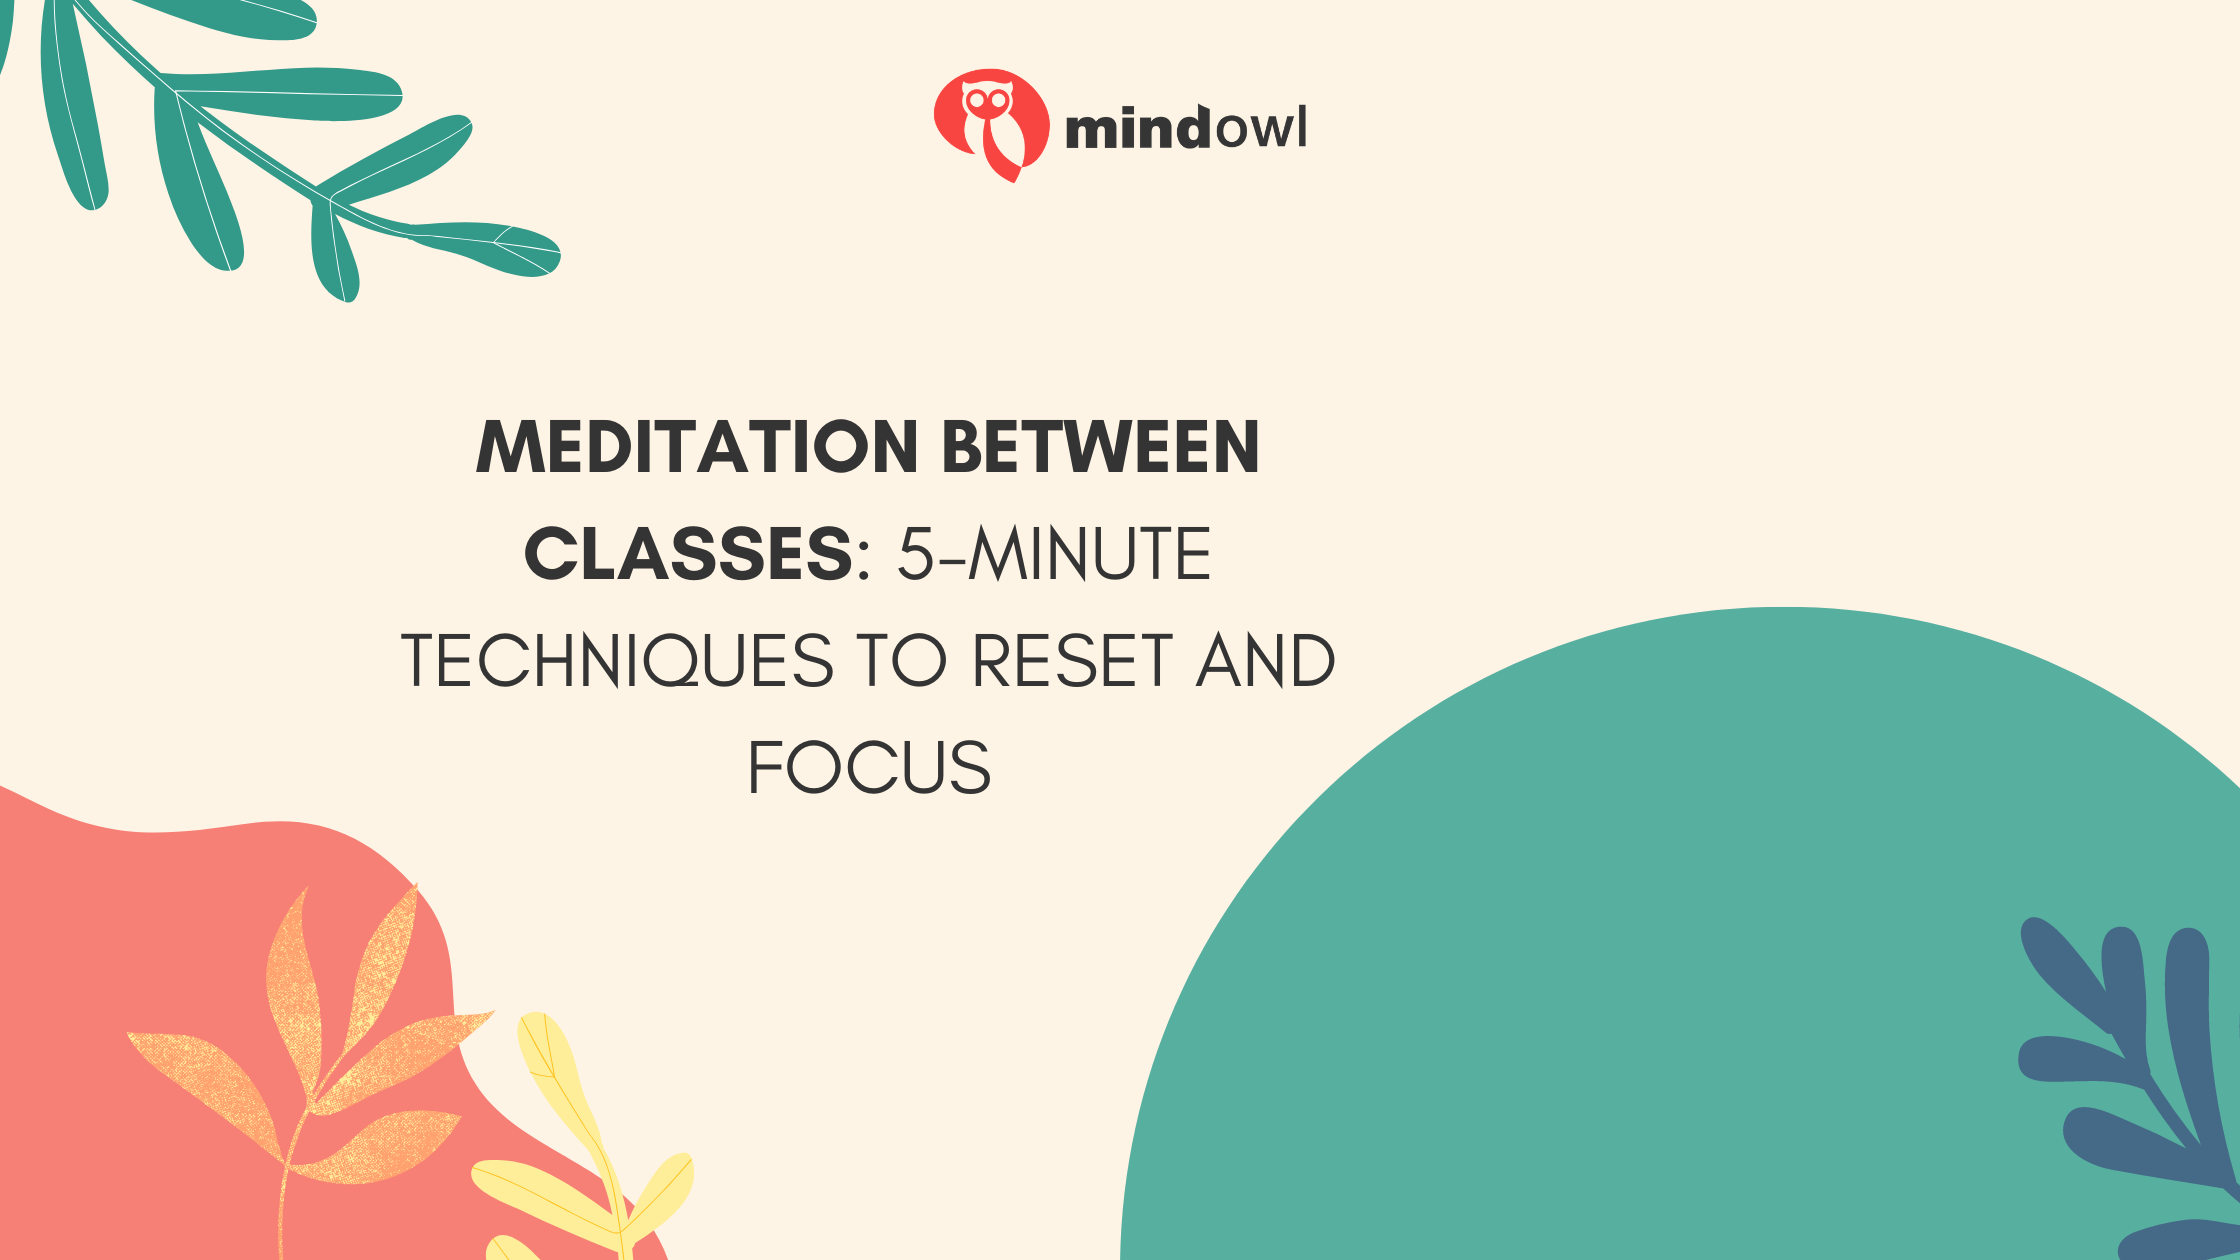 Meditation Between Classes: 5-Minute Techniques to Reset and Focus for Busy Students